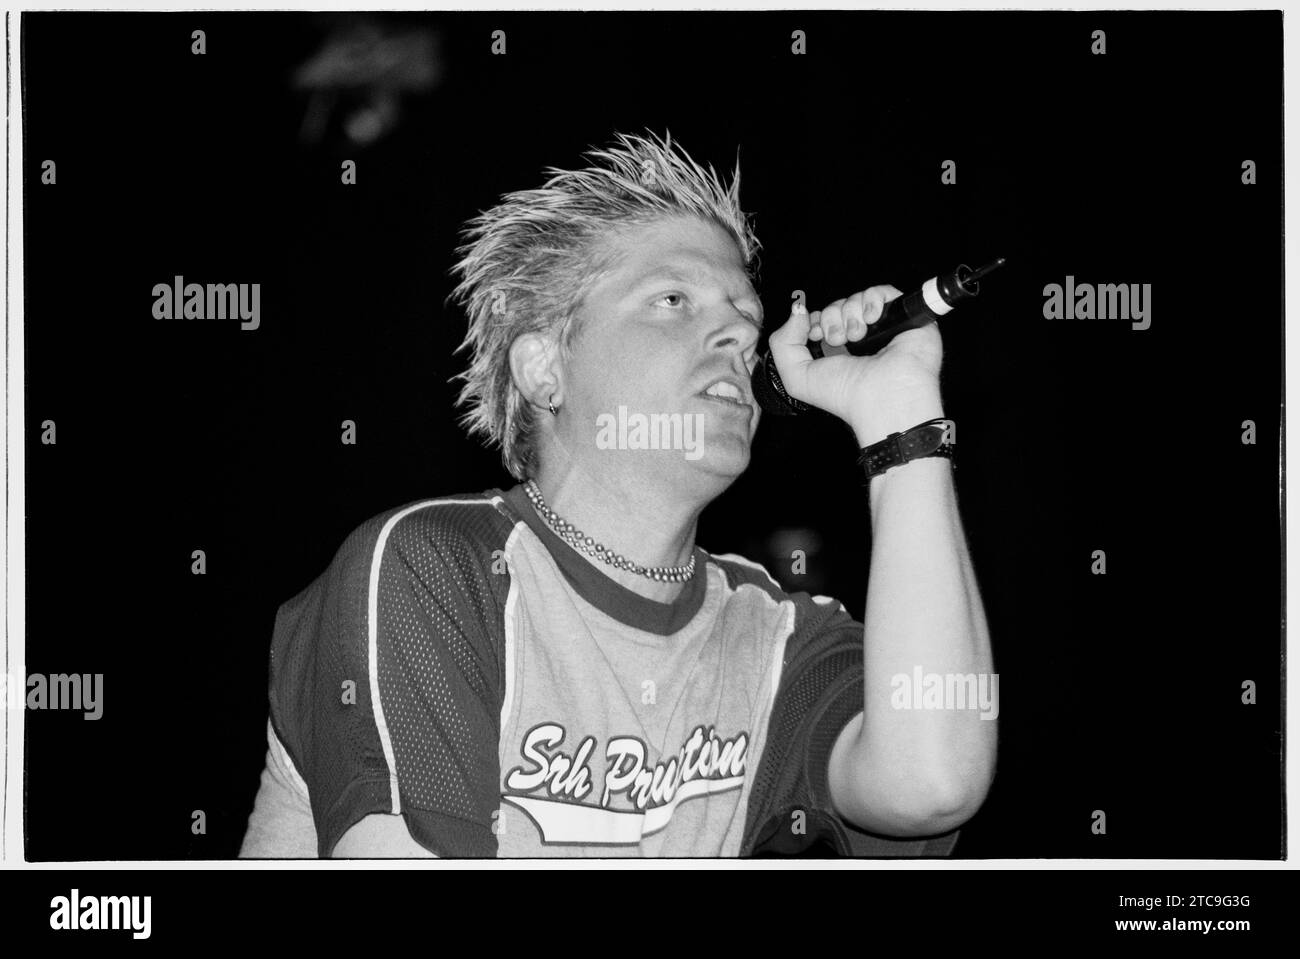 DEXTER HOLLAND, THE OFFSPRING, 1999: A young Dexter Holland of the rock band The Offspring playing at Reading Festival, England, UK on 29 August 1999. The band were touring with their iconic 5th studio album 'Americana' and its lead single the worldwide mega hit Pretty Fly (For a White Guy)'. Photo: Rob Watkins Stock Photo